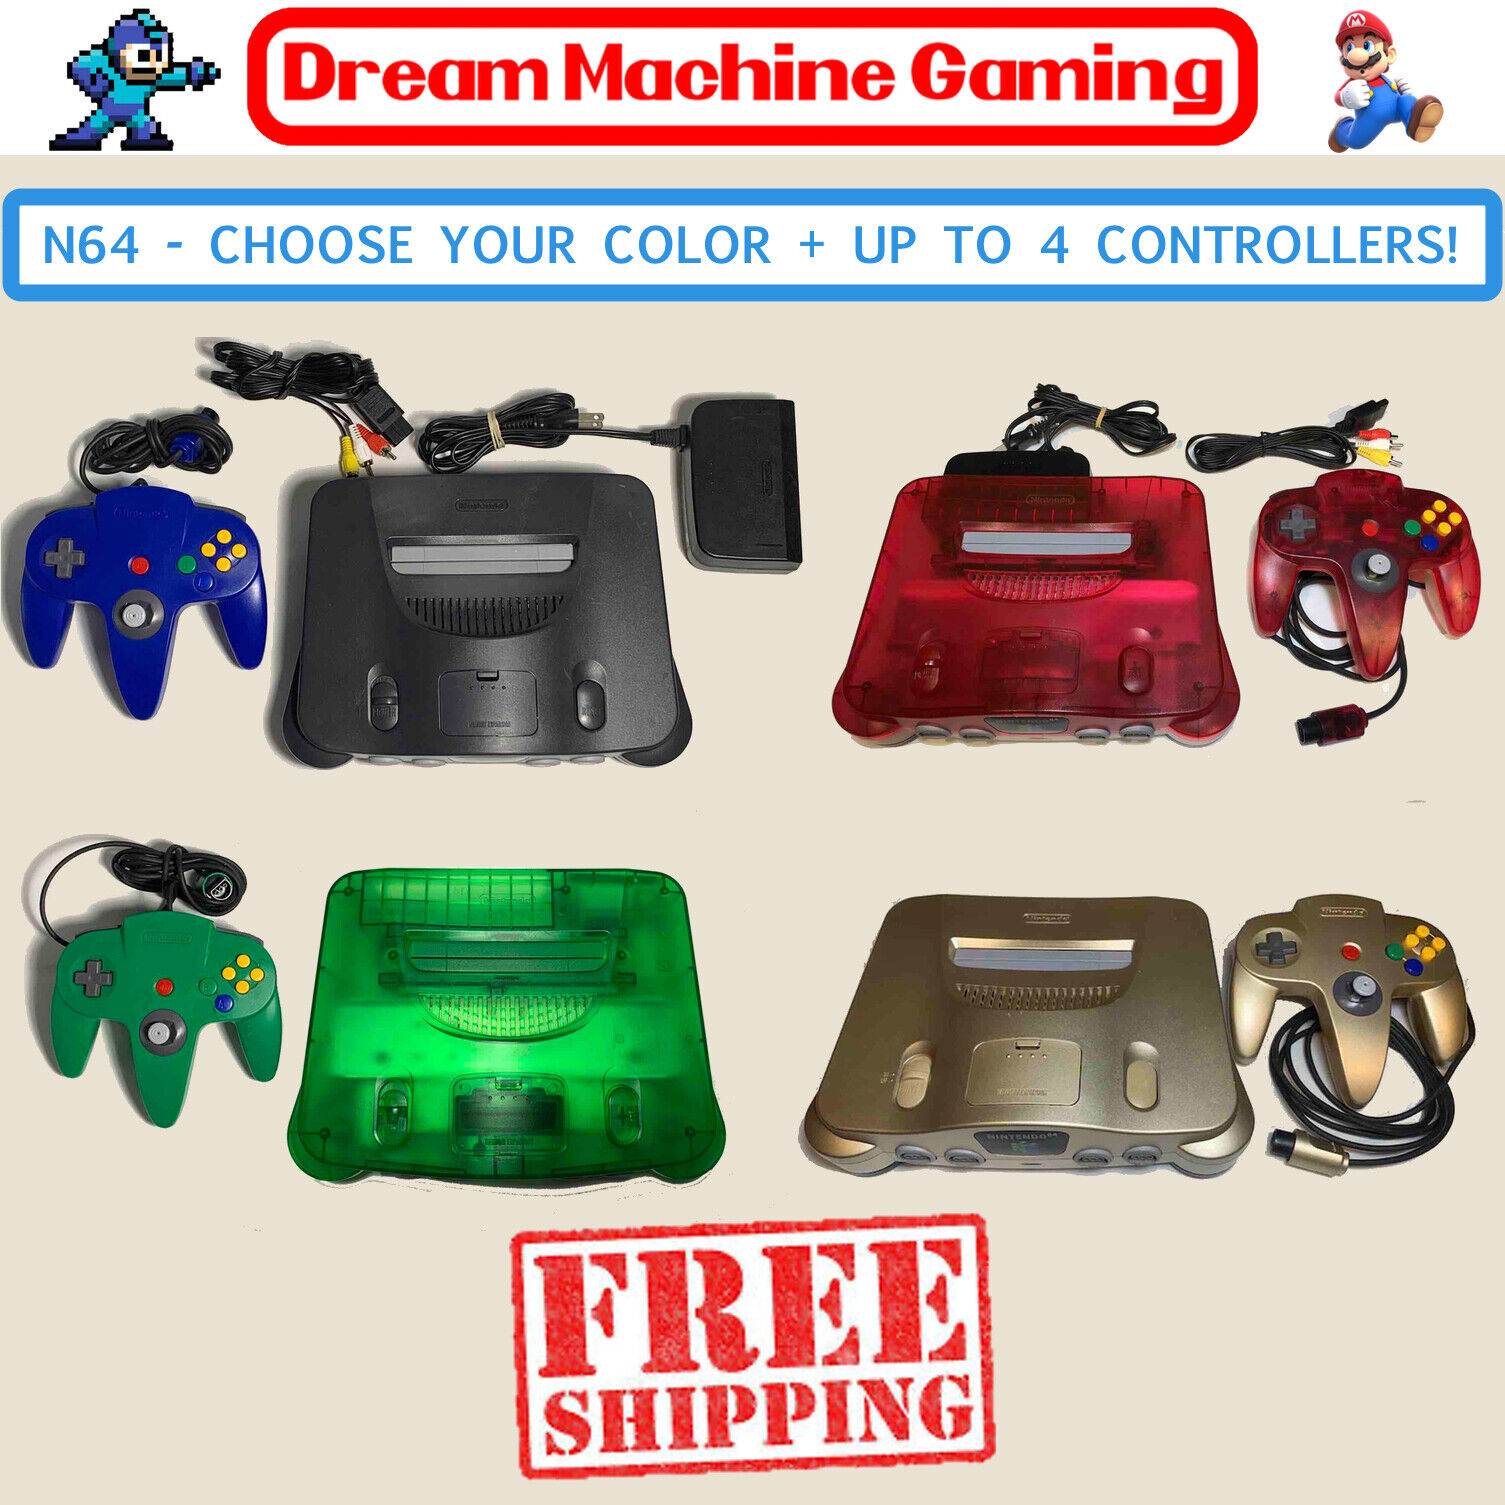 Nintendo 64 N64 Console Pick Your Color + up 4 AUTHENTIC controllers + Cords! | eBay